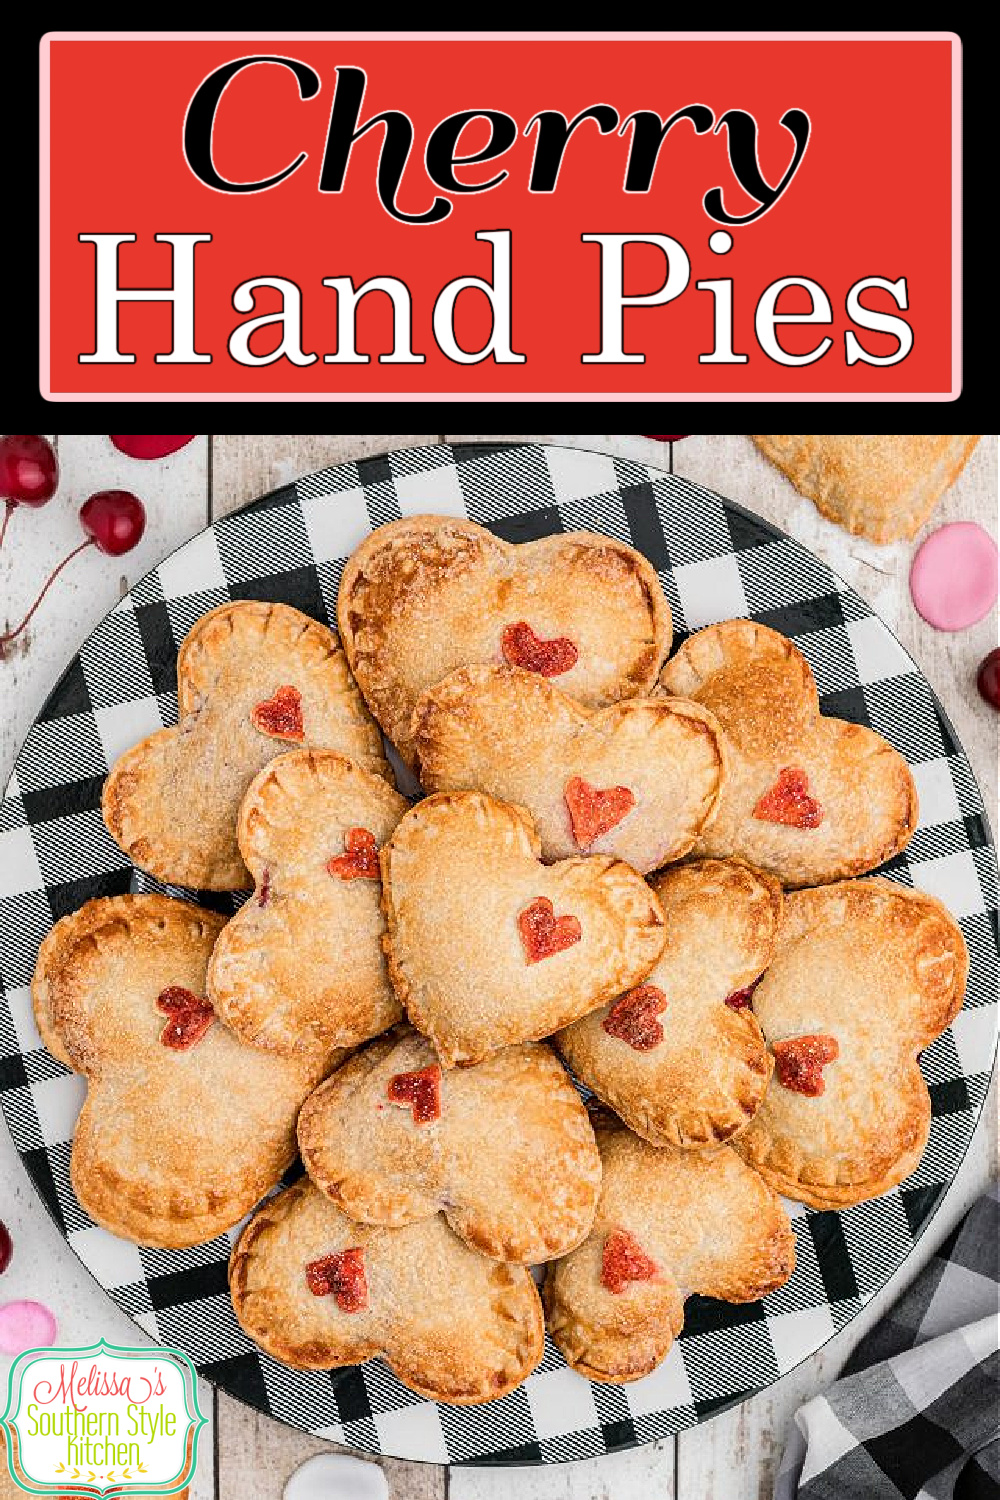 These heart shaped Cherry Hand Pies are a sensational homemade dessert that says "I love you" with each and  every bite #cherrypie #easycherrypierecipes #pies #valnetinesday #valnetinesdaydesserts #cherries #minipies #cherryhandpies #heartshapedcherrypies via @melissasssk